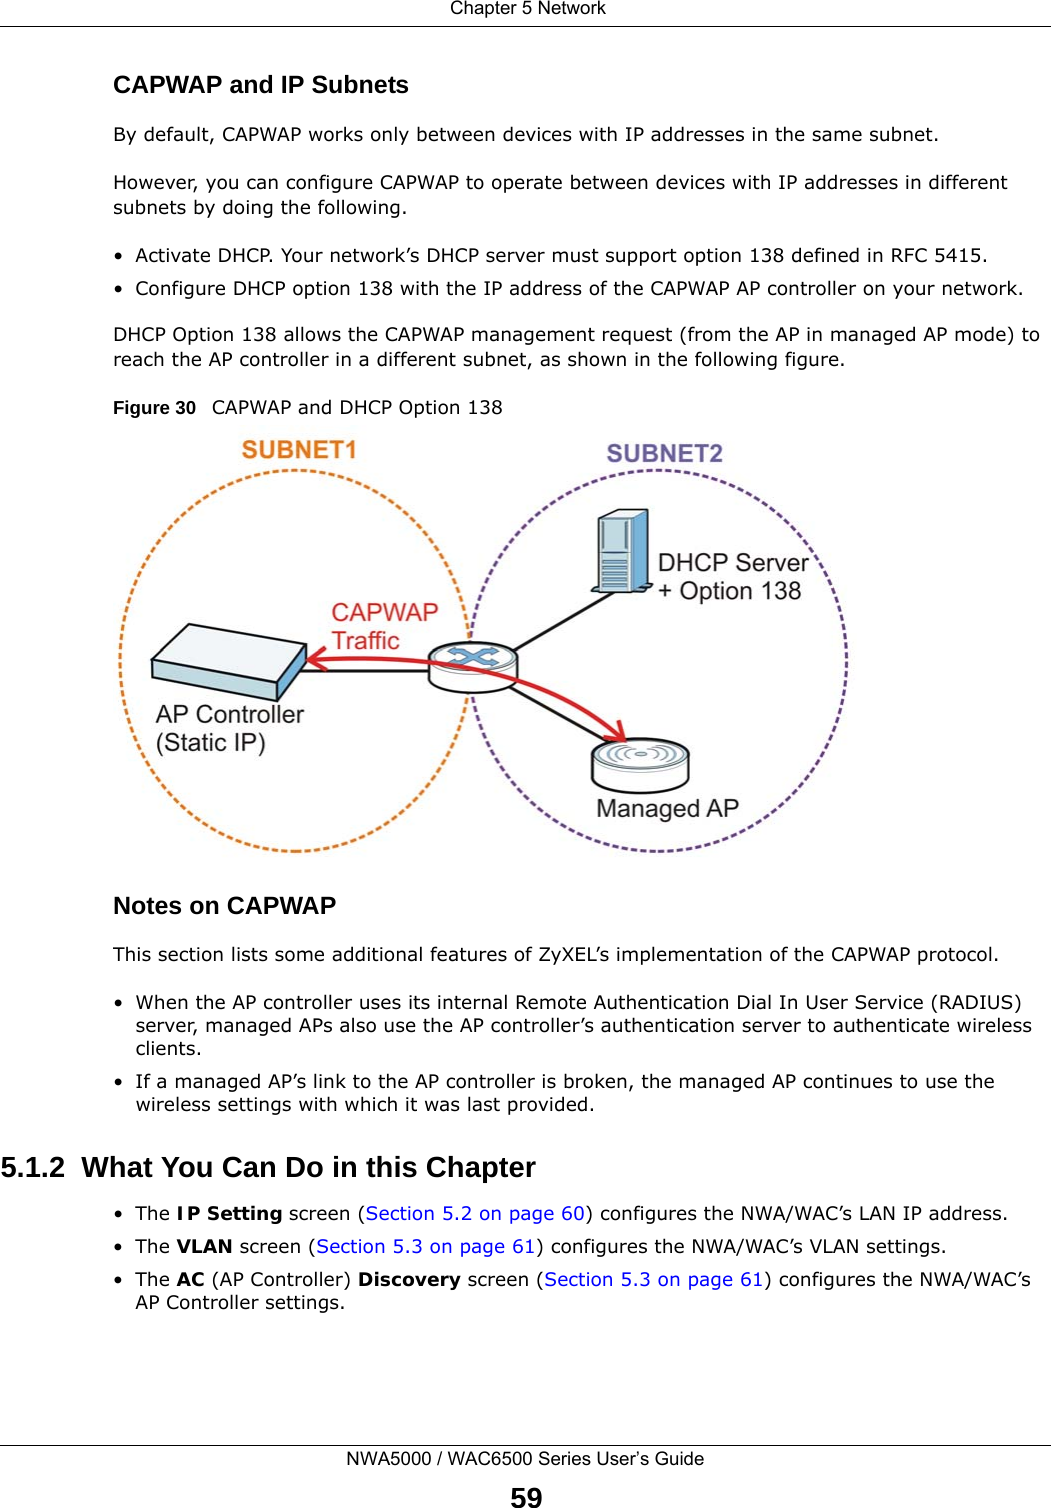  Chapter 5 NetworkNWA5000 / WAC6500 Series User’s Guide59CAPWAP and IP SubnetsBy default, CAPWAP works only between devices with IP addresses in the same subnet. However, you can configure CAPWAP to operate between devices with IP addresses in different subnets by doing the following.• Activate DHCP. Your network’s DHCP server must support option 138 defined in RFC 5415.• Configure DHCP option 138 with the IP address of the CAPWAP AP controller on your network.DHCP Option 138 allows the CAPWAP management request (from the AP in managed AP mode) to reach the AP controller in a different subnet, as shown in the following figure.Figure 30   CAPWAP and DHCP Option 138 Notes on CAPWAPThis section lists some additional features of ZyXEL’s implementation of the CAPWAP protocol.• When the AP controller uses its internal Remote Authentication Dial In User Service (RADIUS) server, managed APs also use the AP controller’s authentication server to authenticate wireless clients.• If a managed AP’s link to the AP controller is broken, the managed AP continues to use the wireless settings with which it was last provided.5.1.2  What You Can Do in this Chapter•The IP Setting screen (Section 5.2 on page 60) configures the NWA/WAC’s LAN IP address. •The VLAN screen (Section 5.3 on page 61) configures the NWA/WAC’s VLAN settings. •The AC (AP Controller) Discovery screen (Section 5.3 on page 61) configures the NWA/WAC’s AP Controller settings.